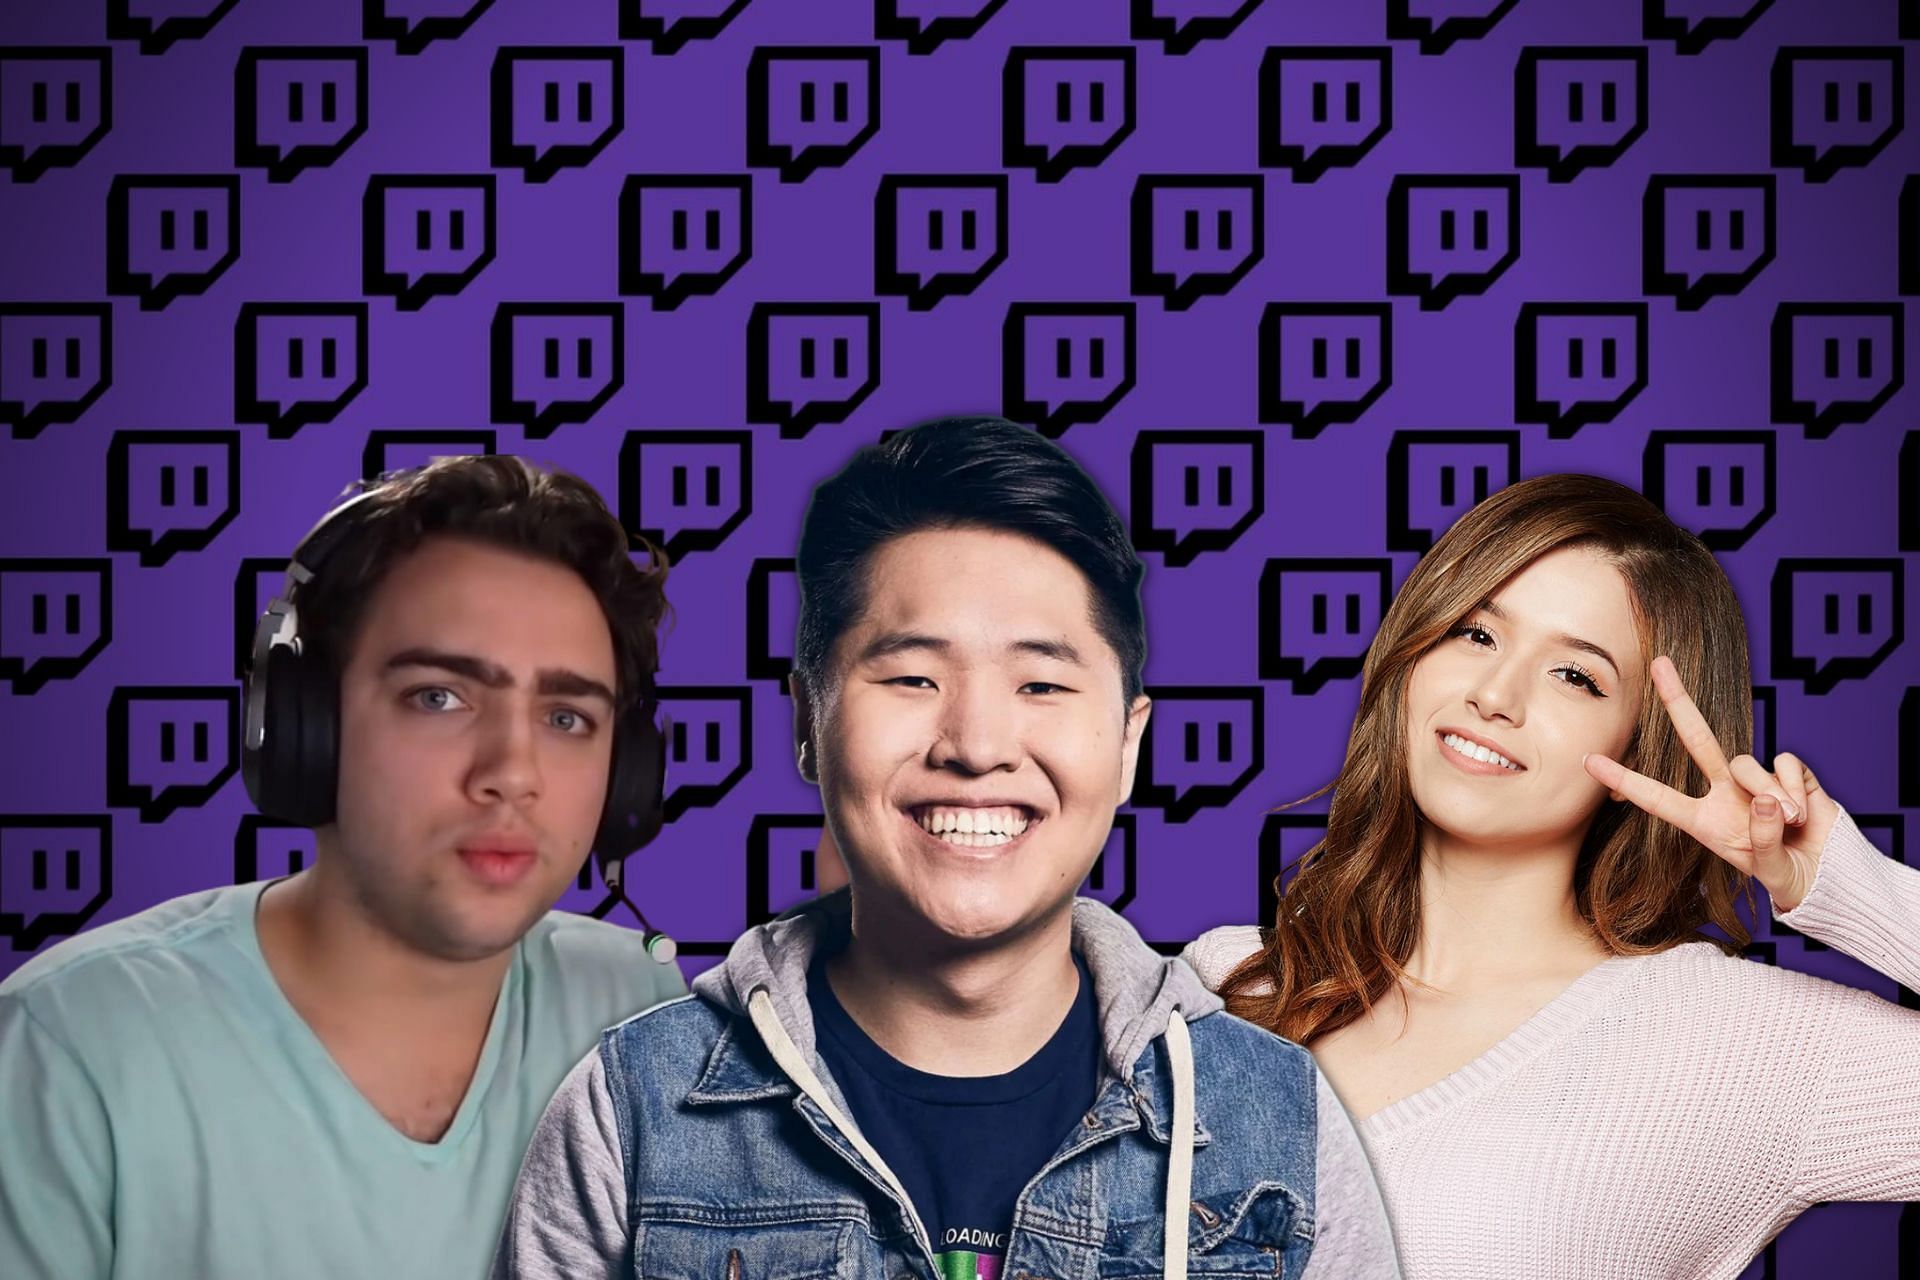 Mizkif and other notable streamers reached out to support Pokimane (Image via Sportskeeda)